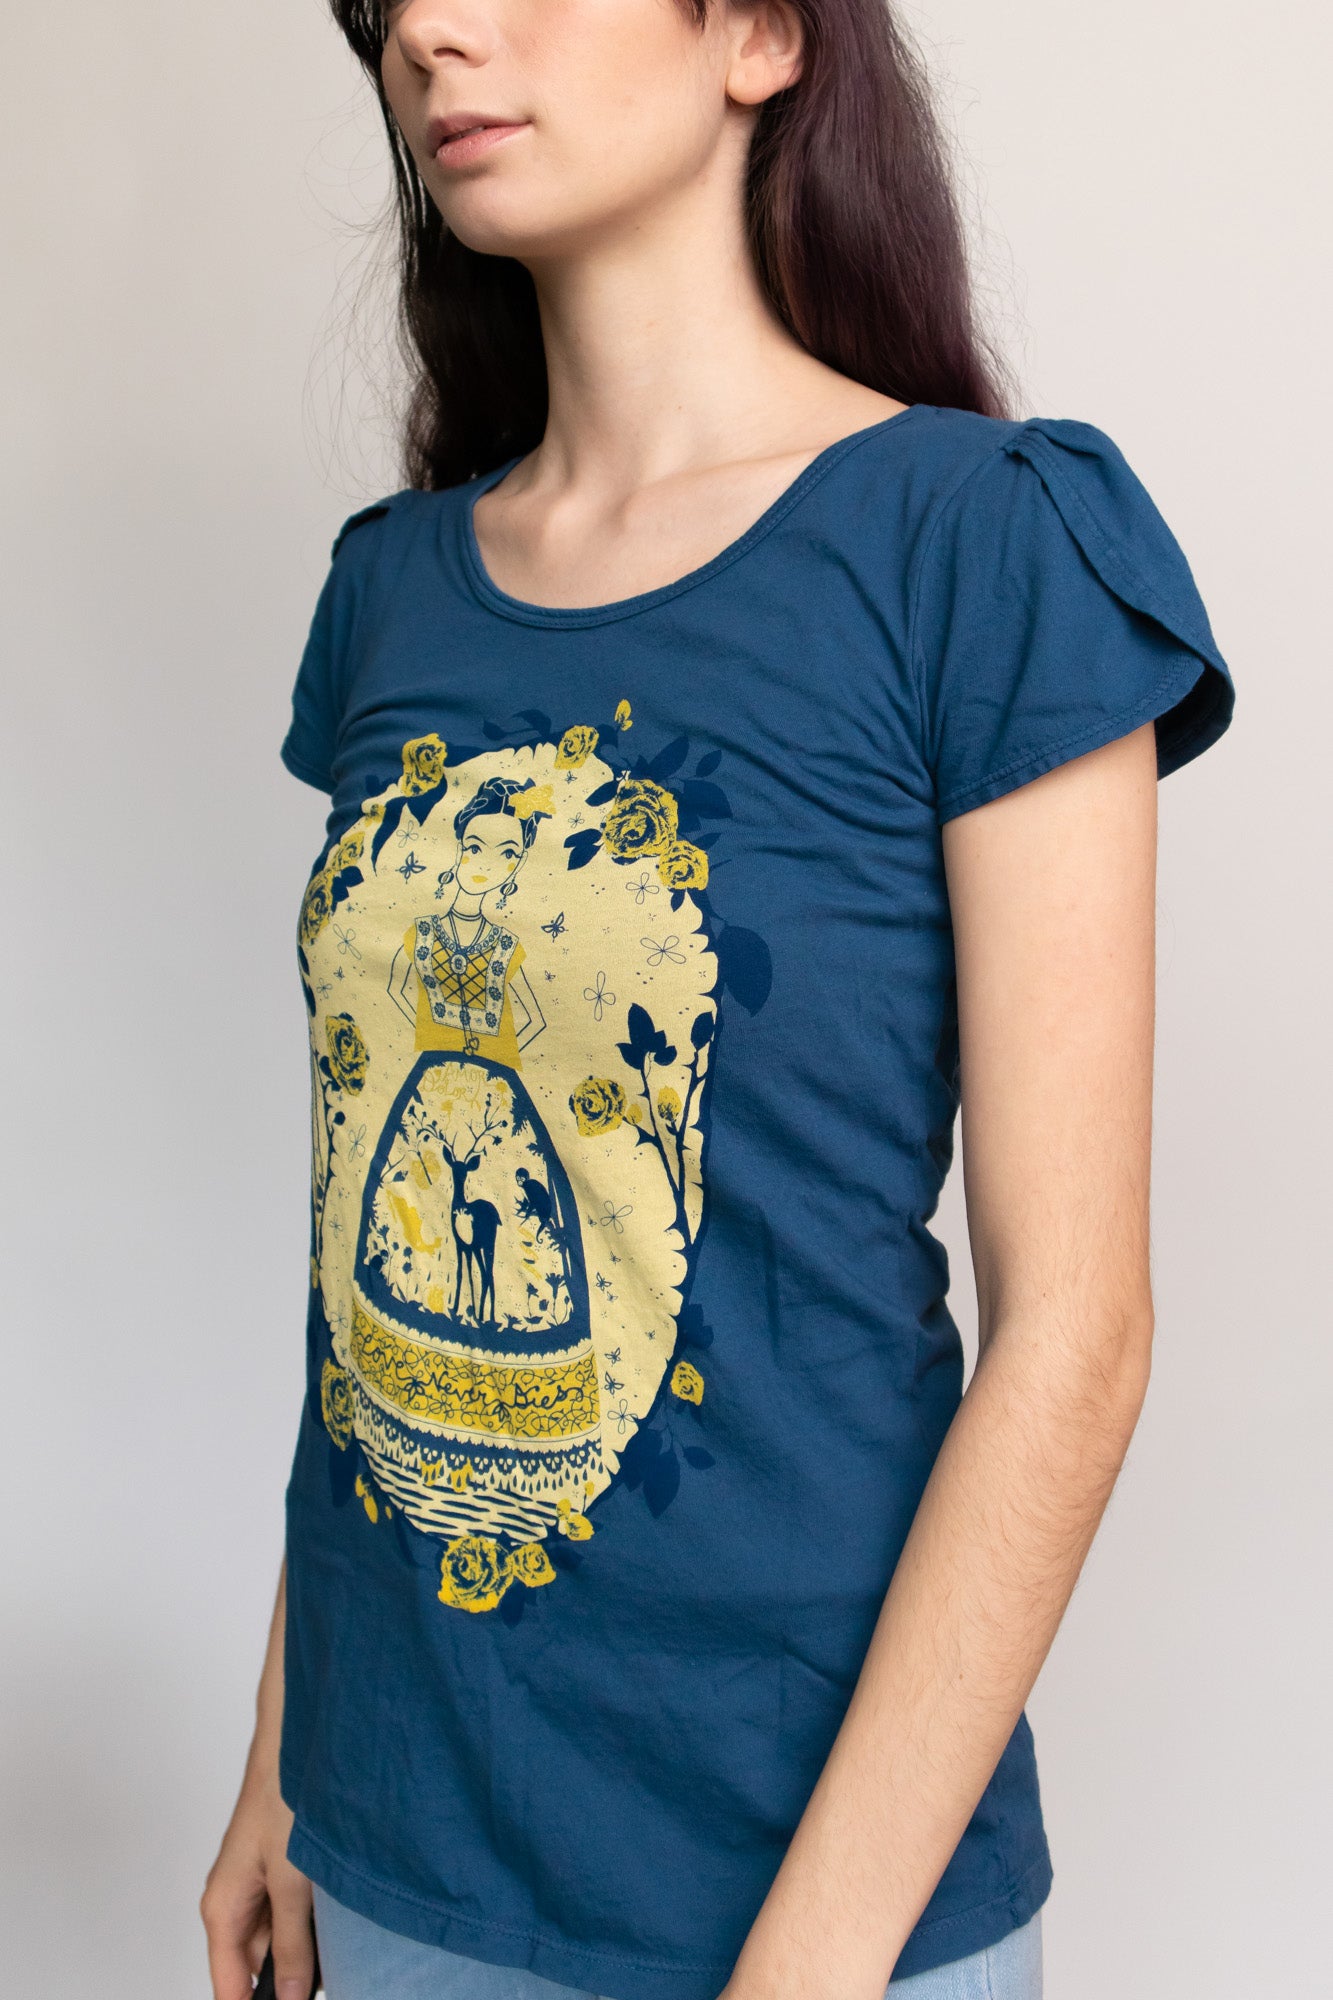 3/4 side view of navy blue tulip-sleeved tee with yellow and blue screen print of an artist woman, deer, and roses